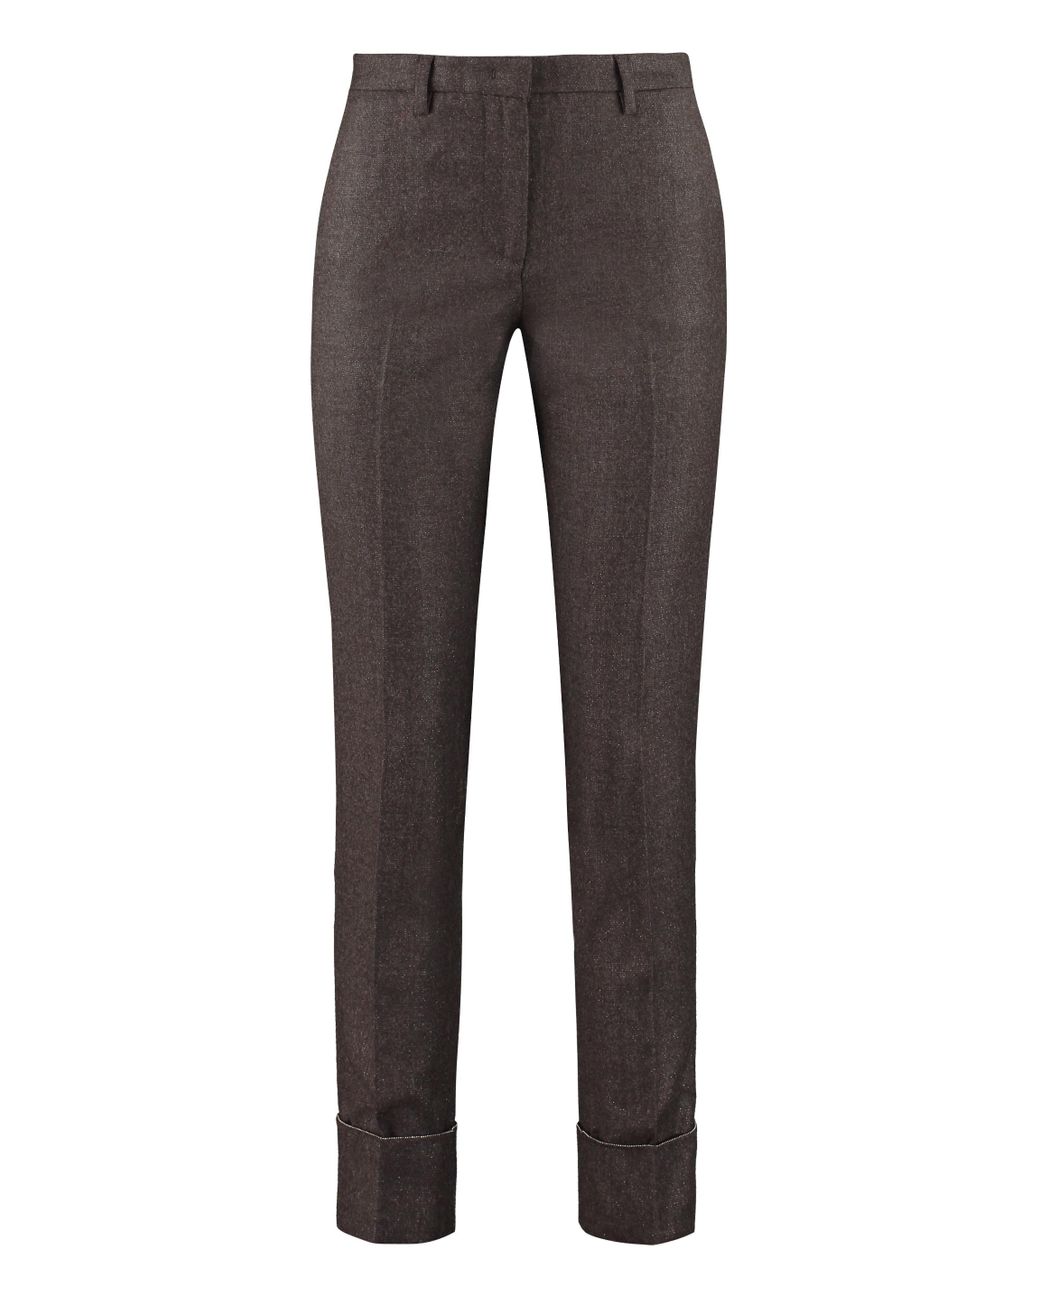 Fabiana Filippi Wool Tailored Trousers in Brown - Lyst